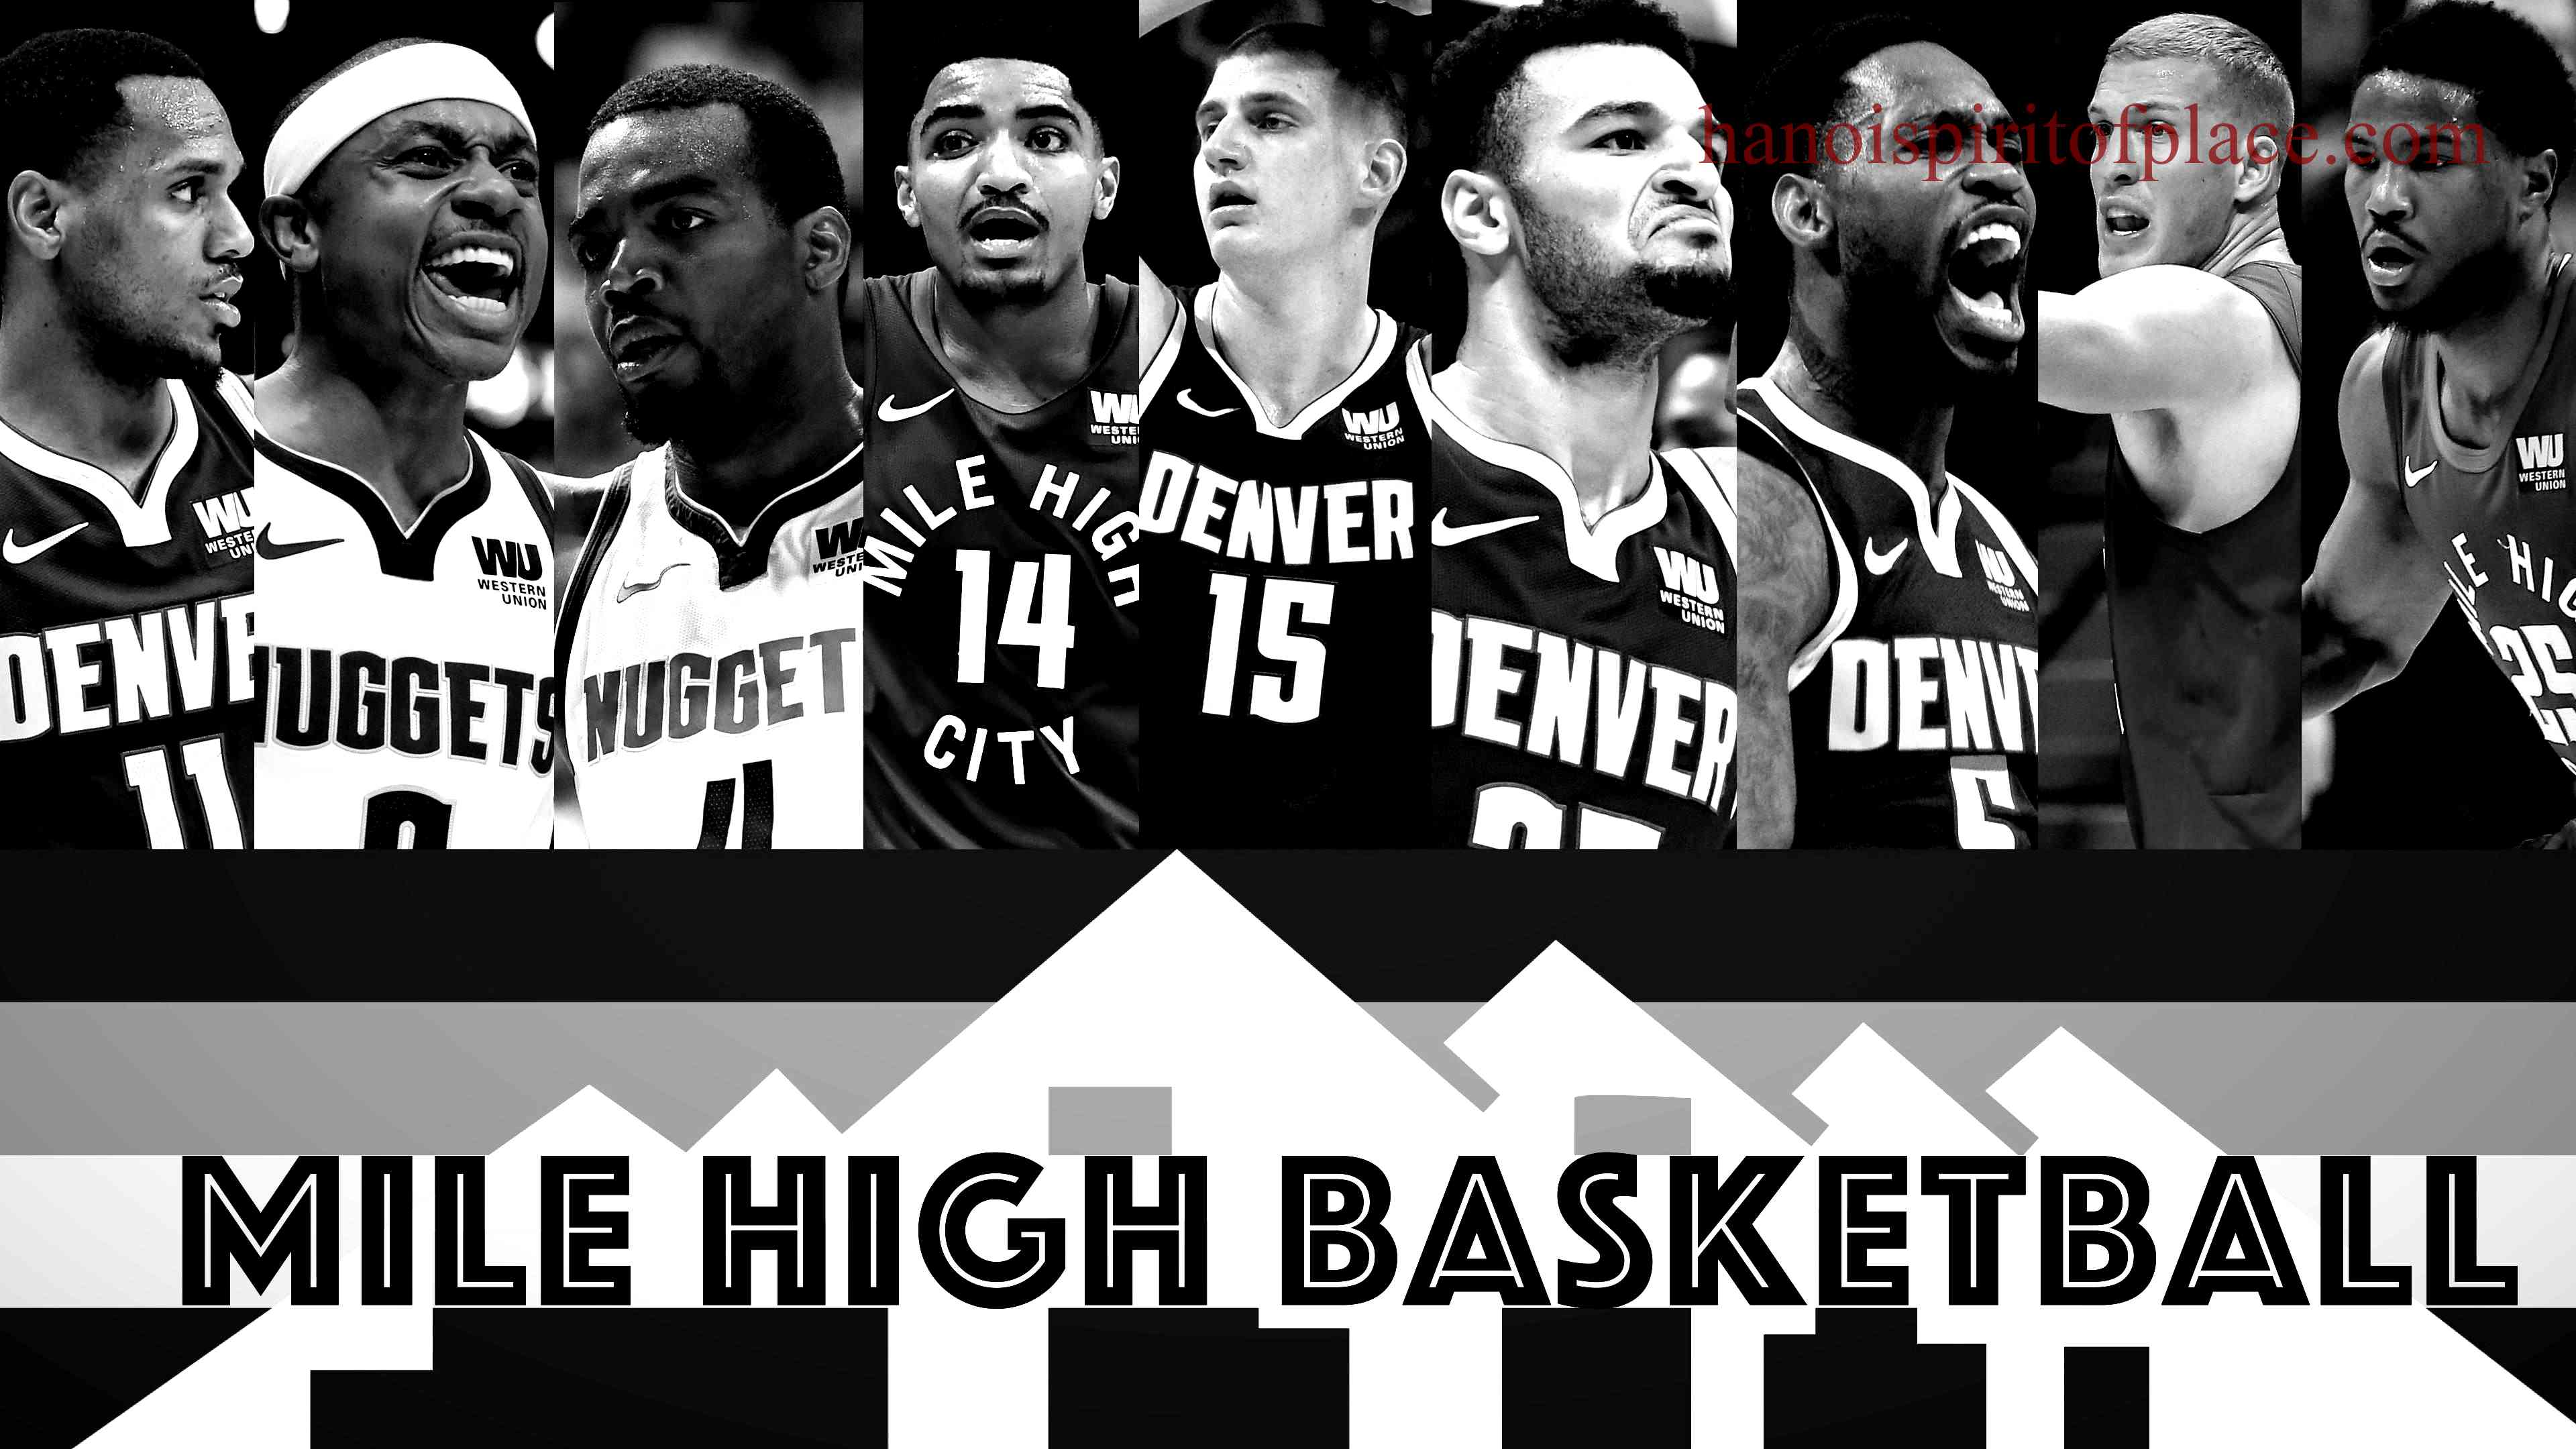 Overview of the Denver Nuggets